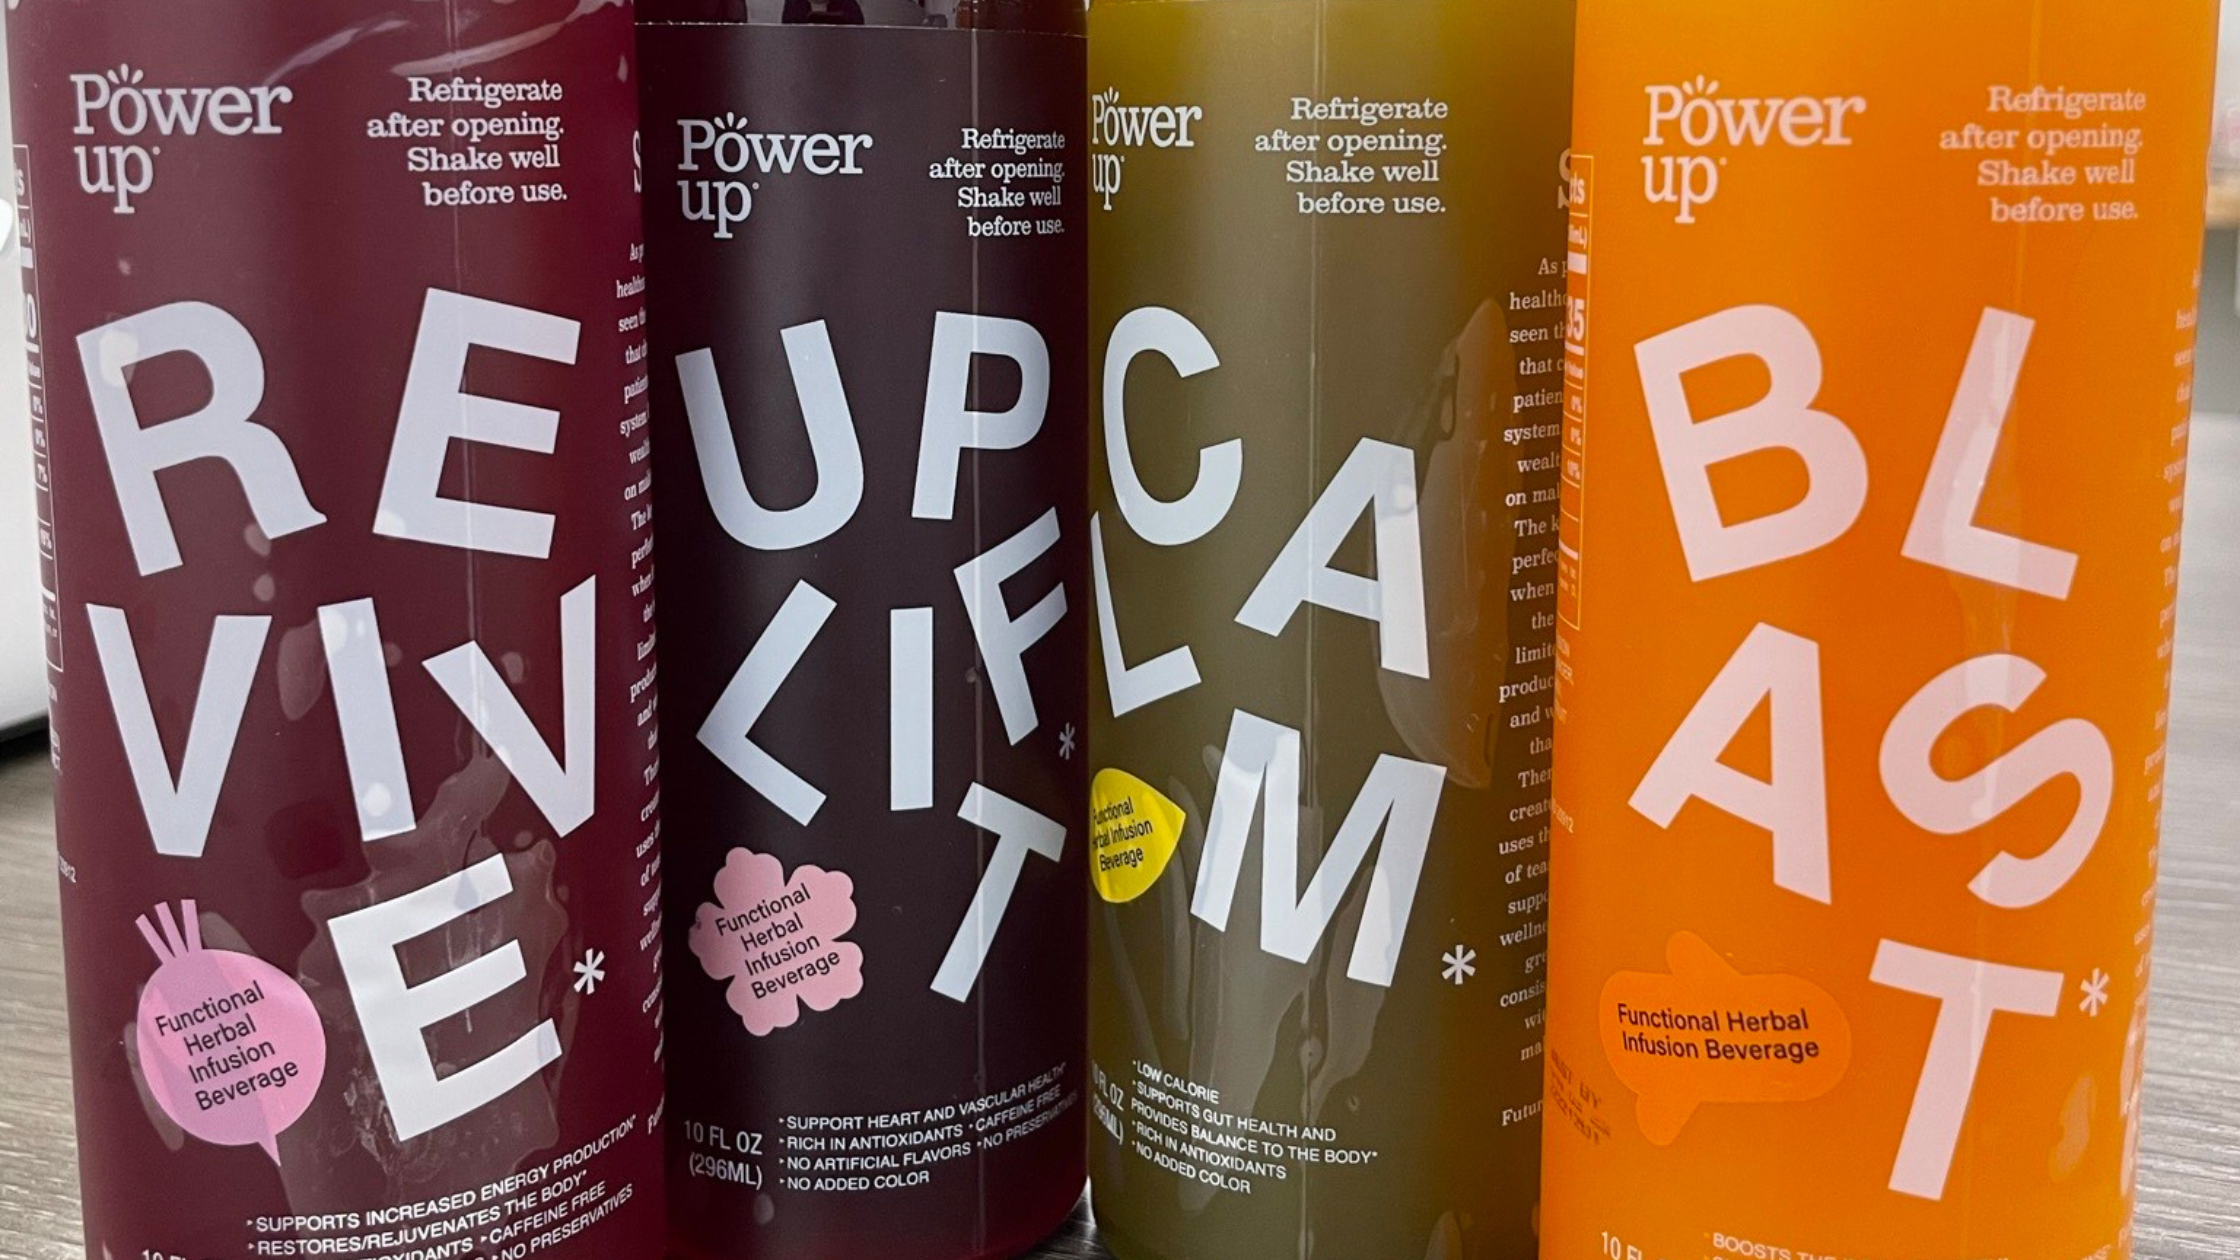 PowerUp: Elevating Your Daily Routine with Vibrant Herbal Infused Beverages